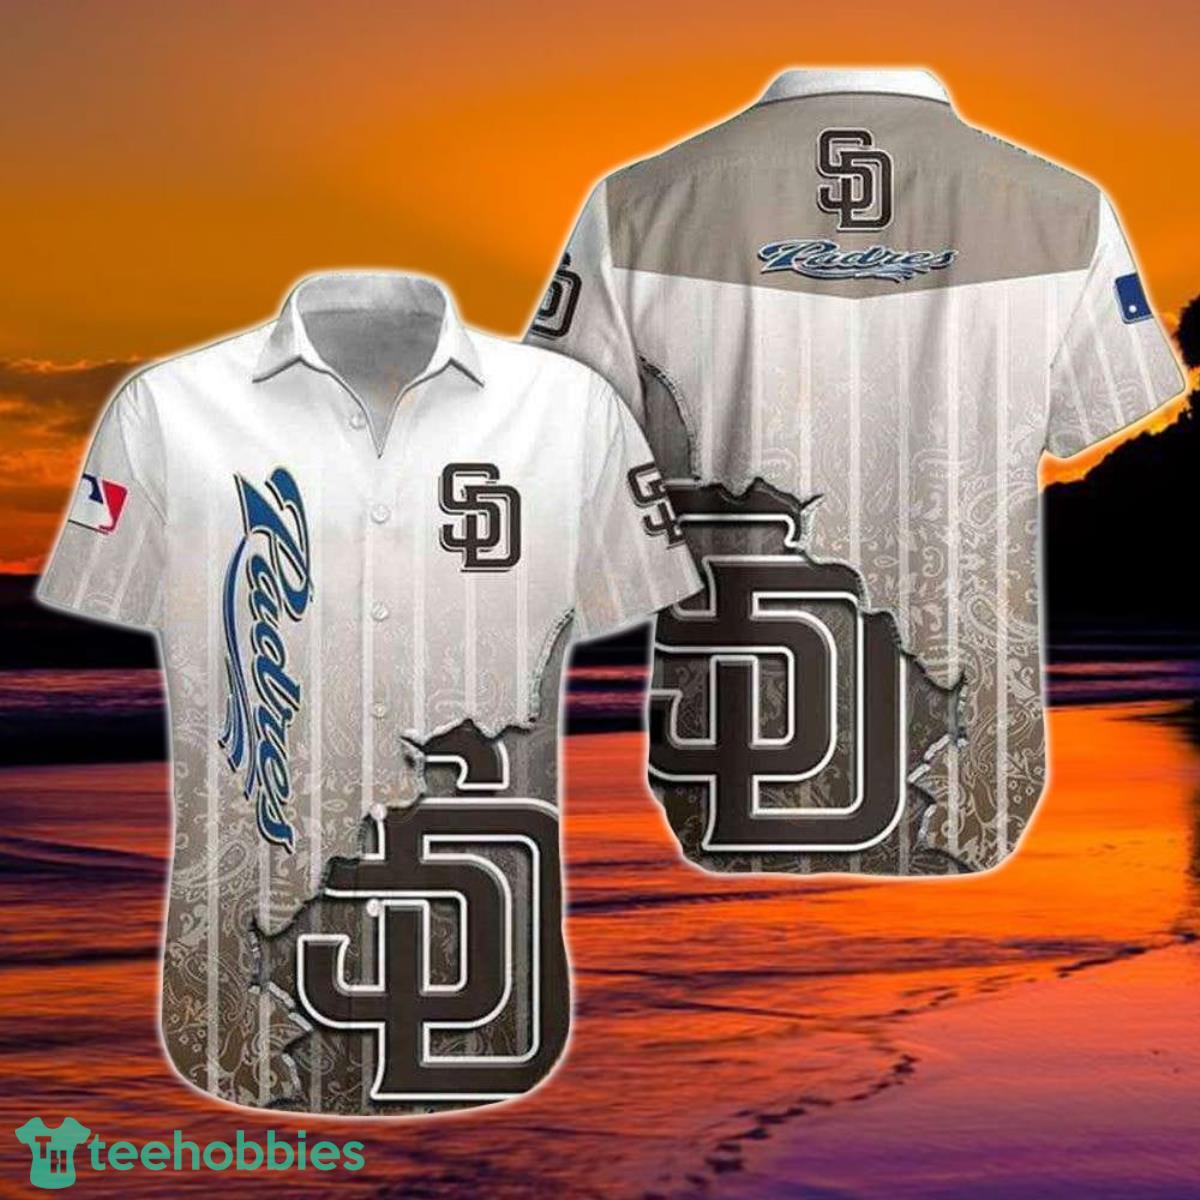 Padres Hoodie Giveaway 2023 Mlb San Diego Padres All Over Printed Shirts  Inspired By Padress Home Hoodie Giveaway Padres Giveaway 2023 Sweatshirt  Tshirt - Laughinks